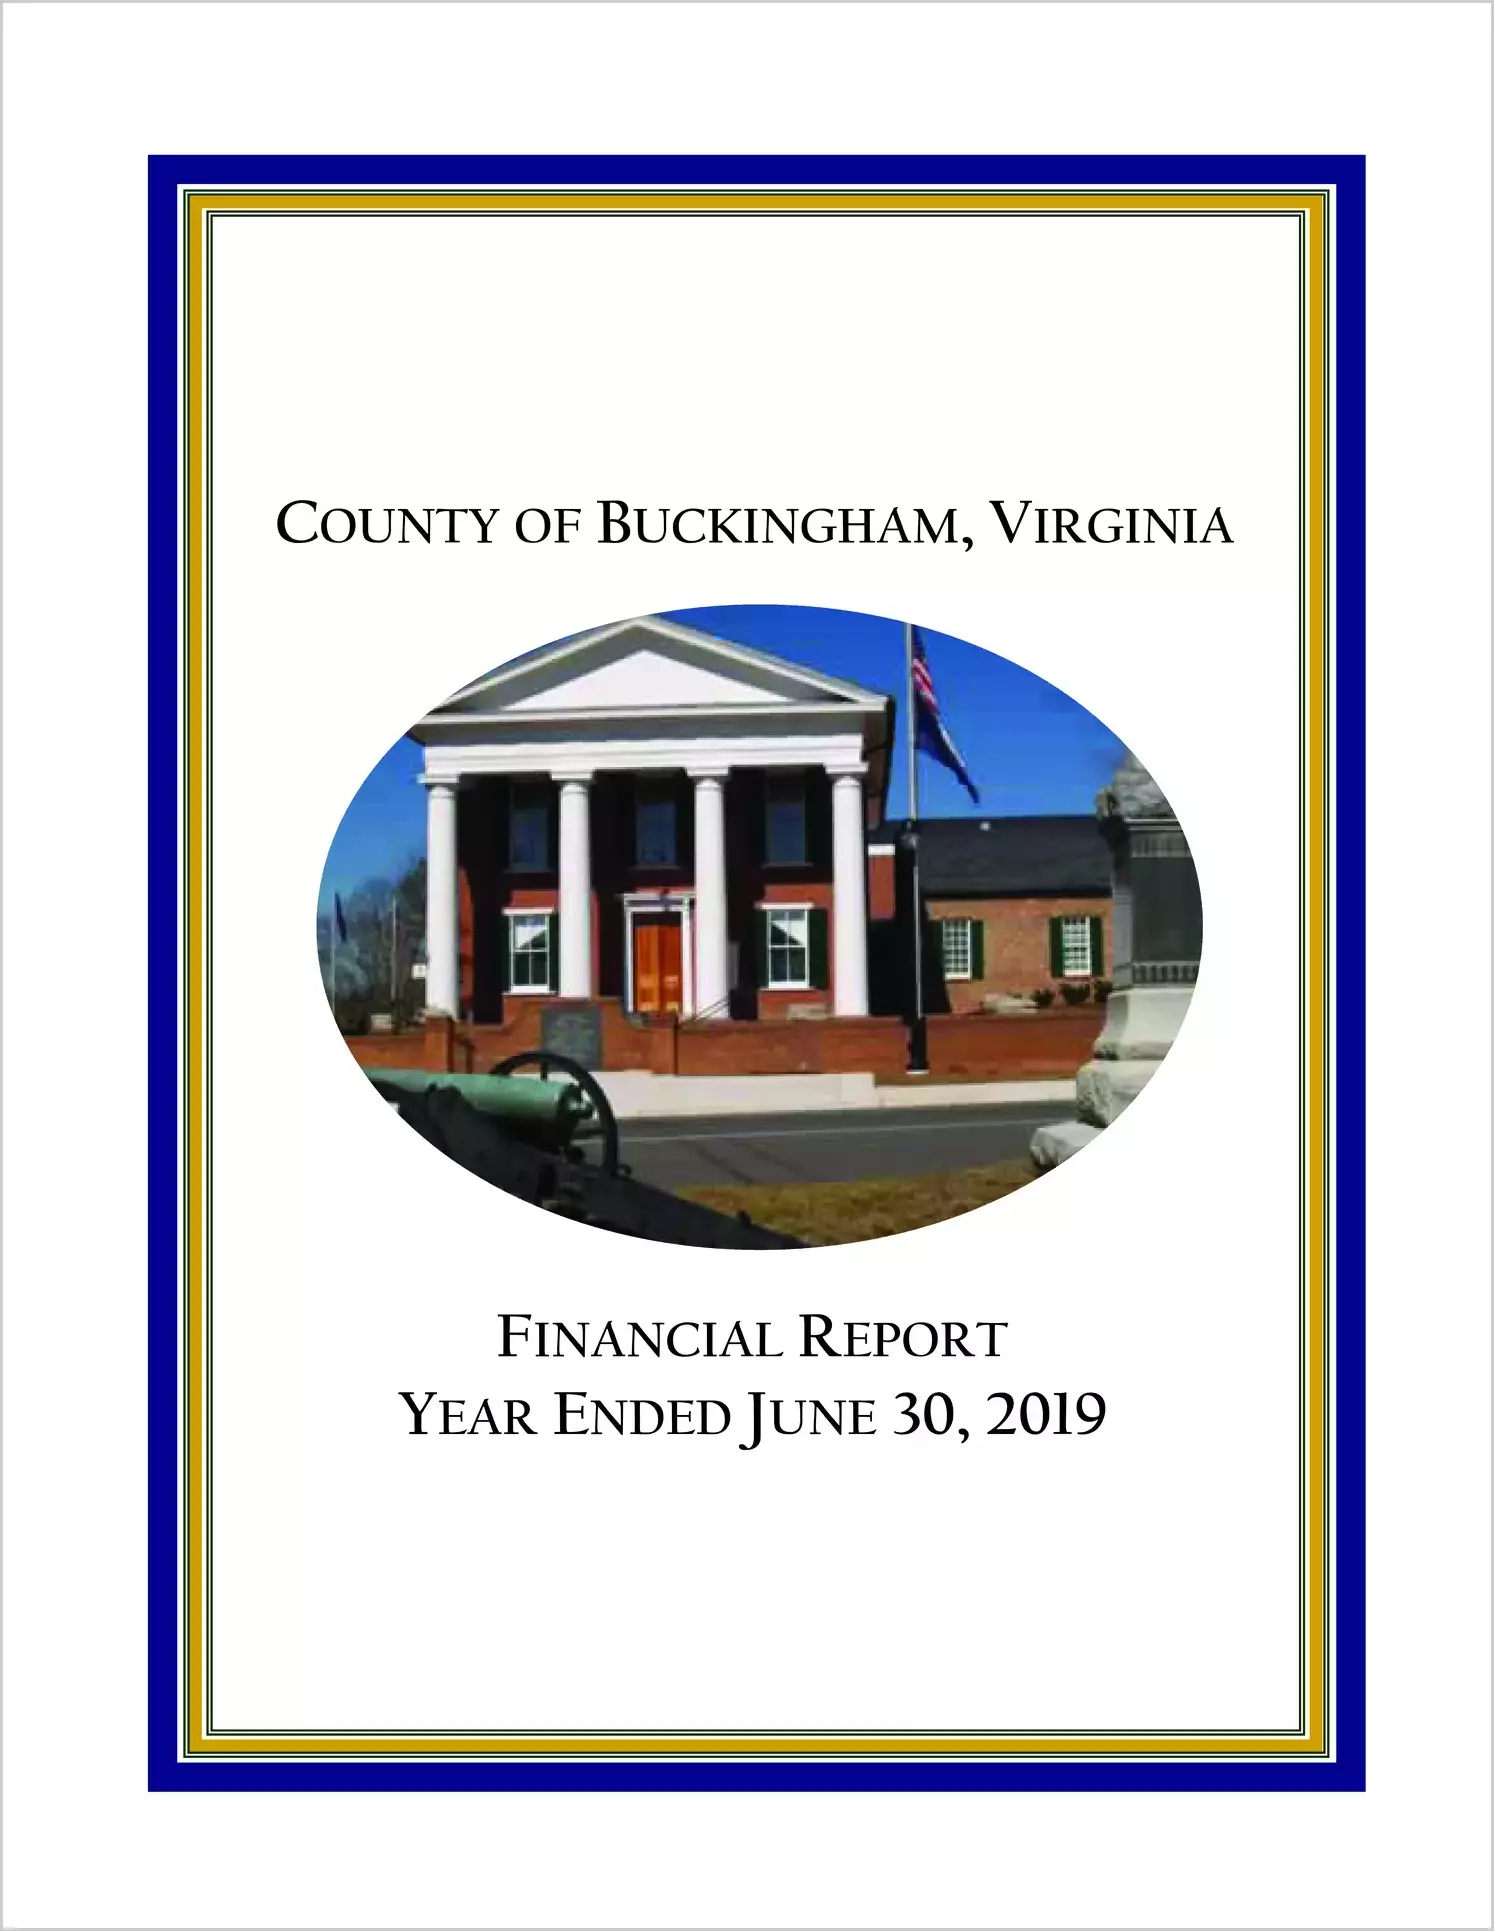 2019 Annual Financial Report for County of Buckingham